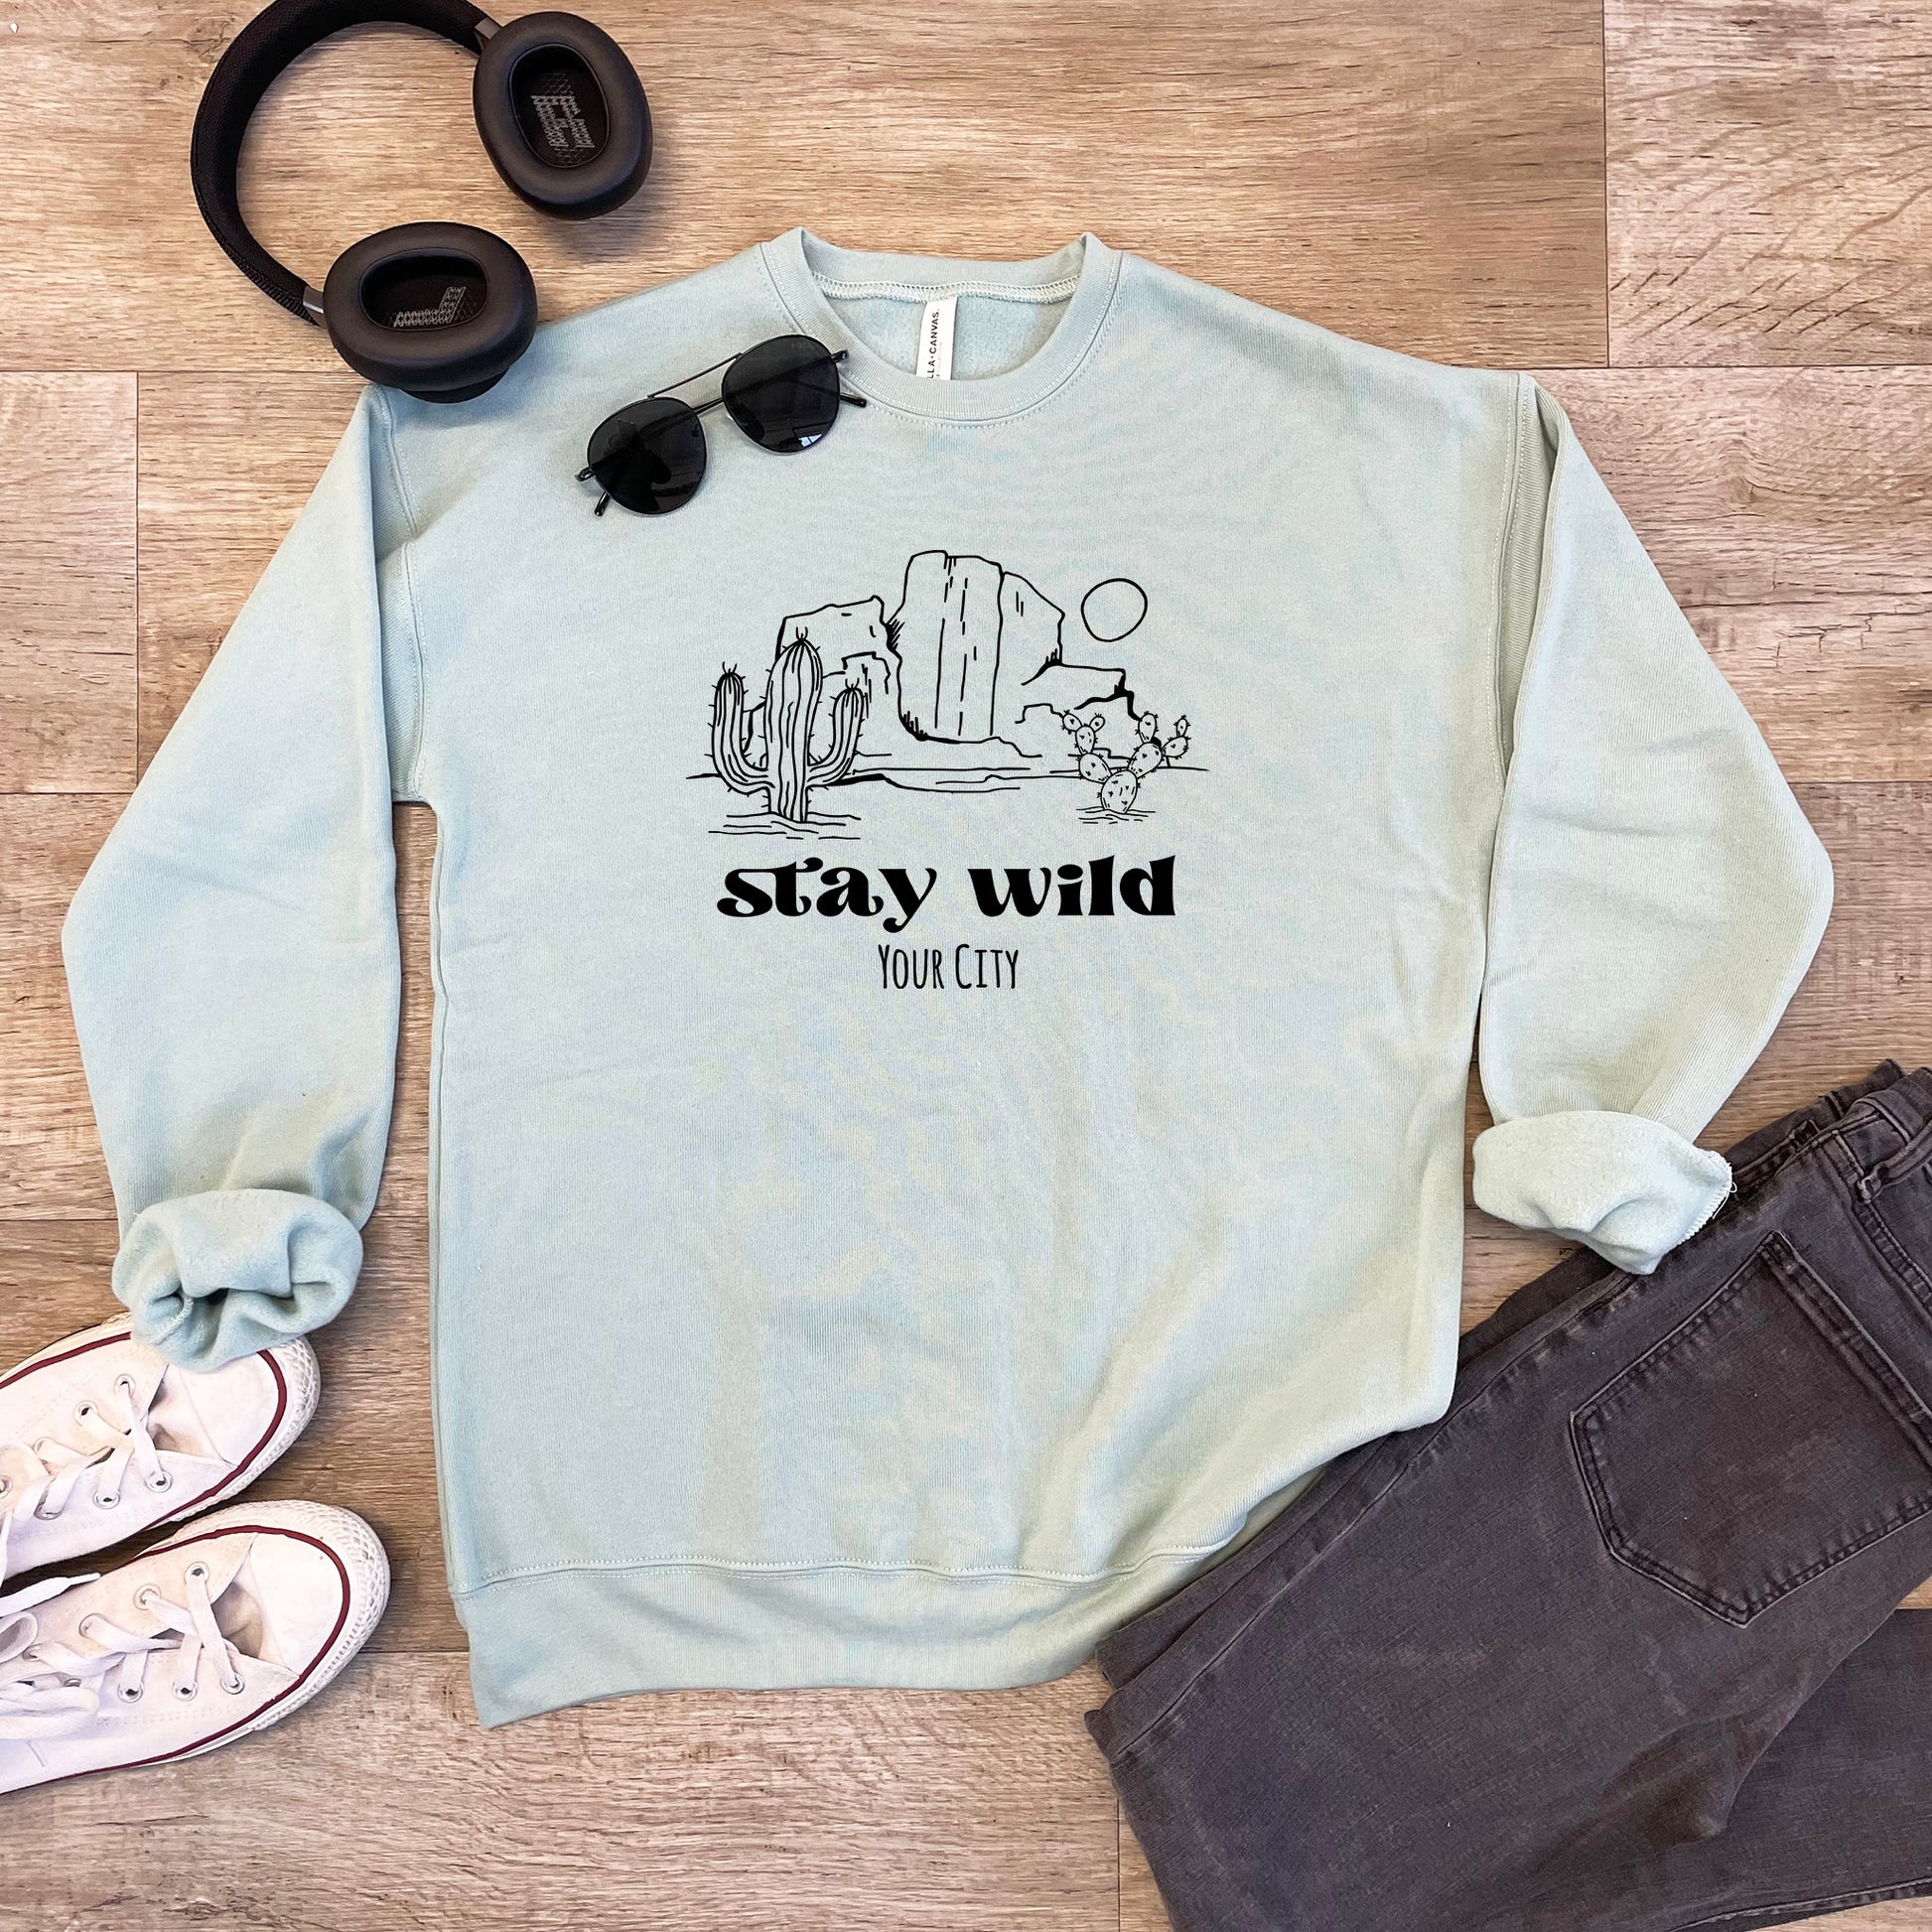 a sweatshirt with a pair of headphones and a pair of sunglasses